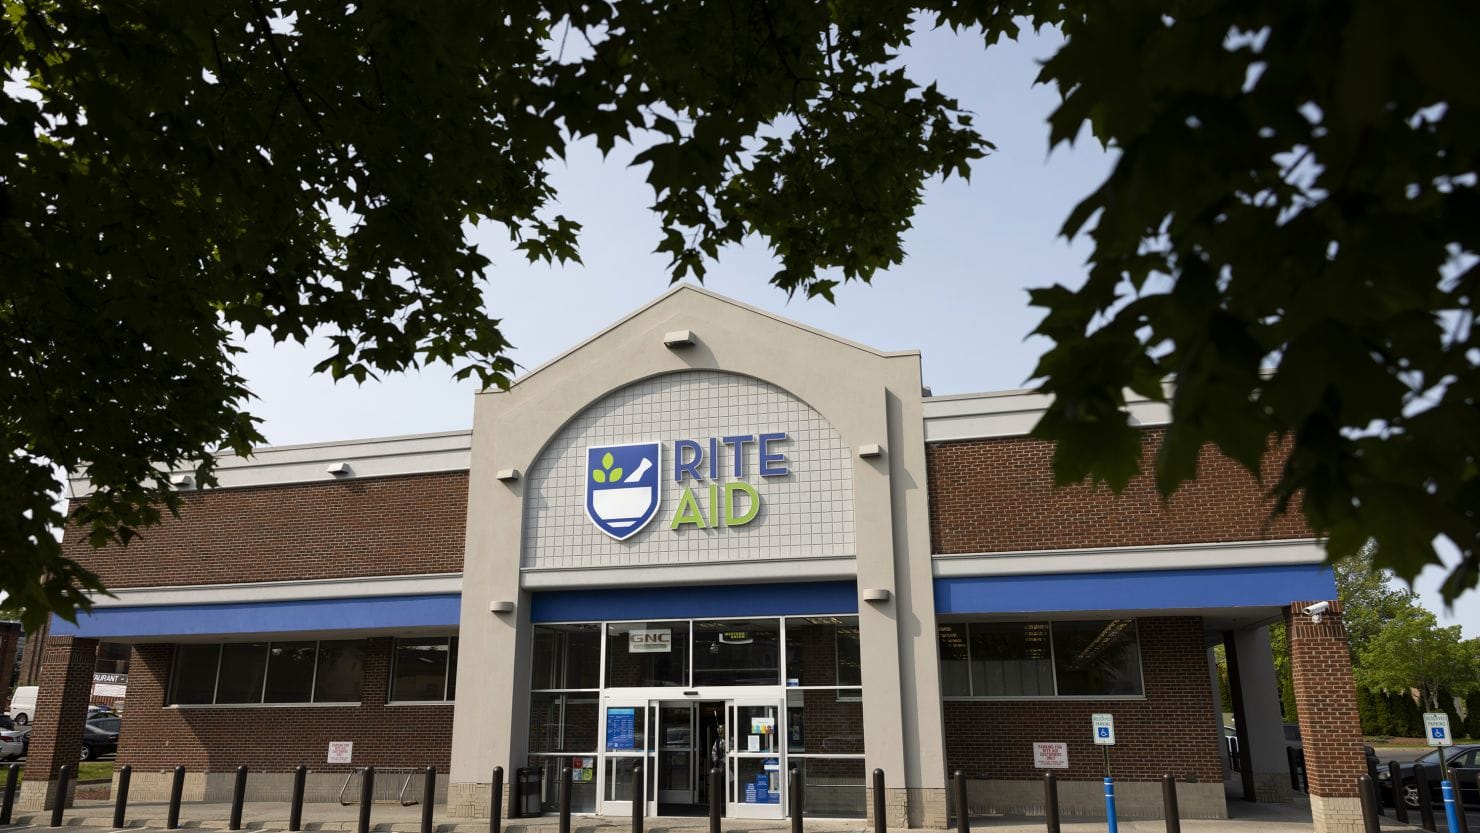 Rite Aid Faces Five-Year Ban on Facial Recognition Technology After FTC Settlement